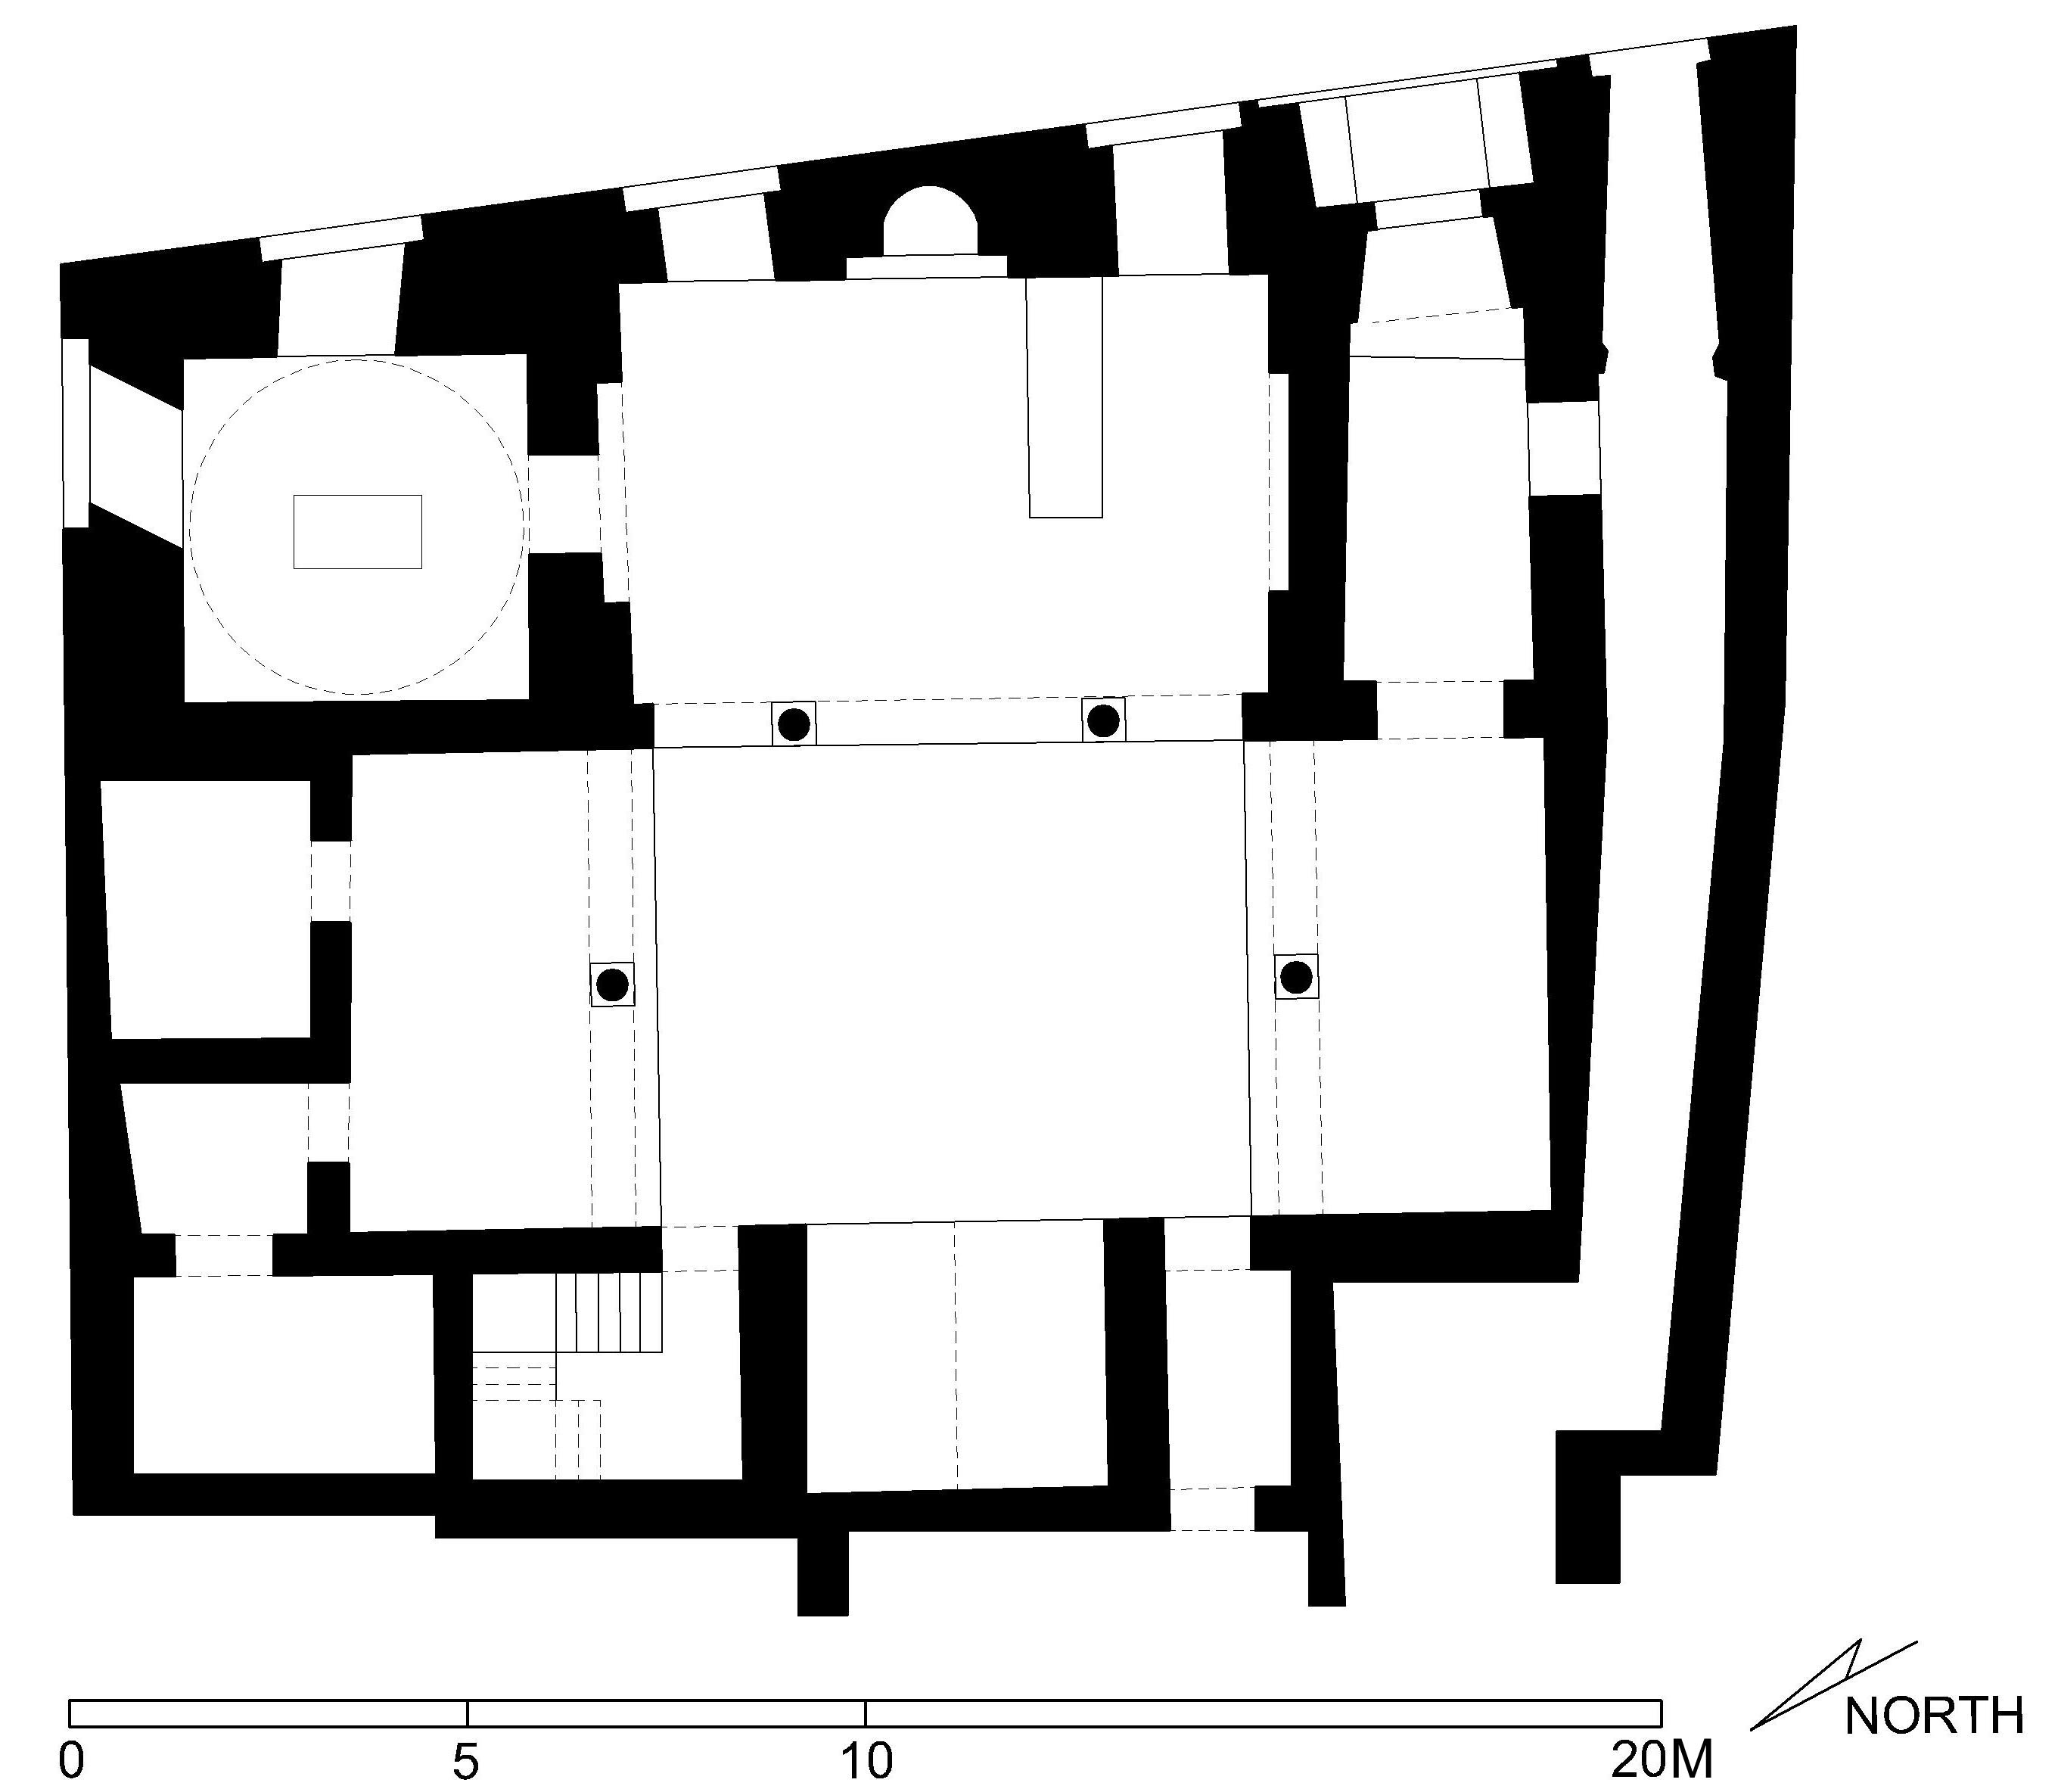 Masjid Ahmad al-Mihmandar - Floor plan of complex (after Meinecke) in AutoCAD 2000 format. Click the download button to download a zipped file containing the .dwg file. 